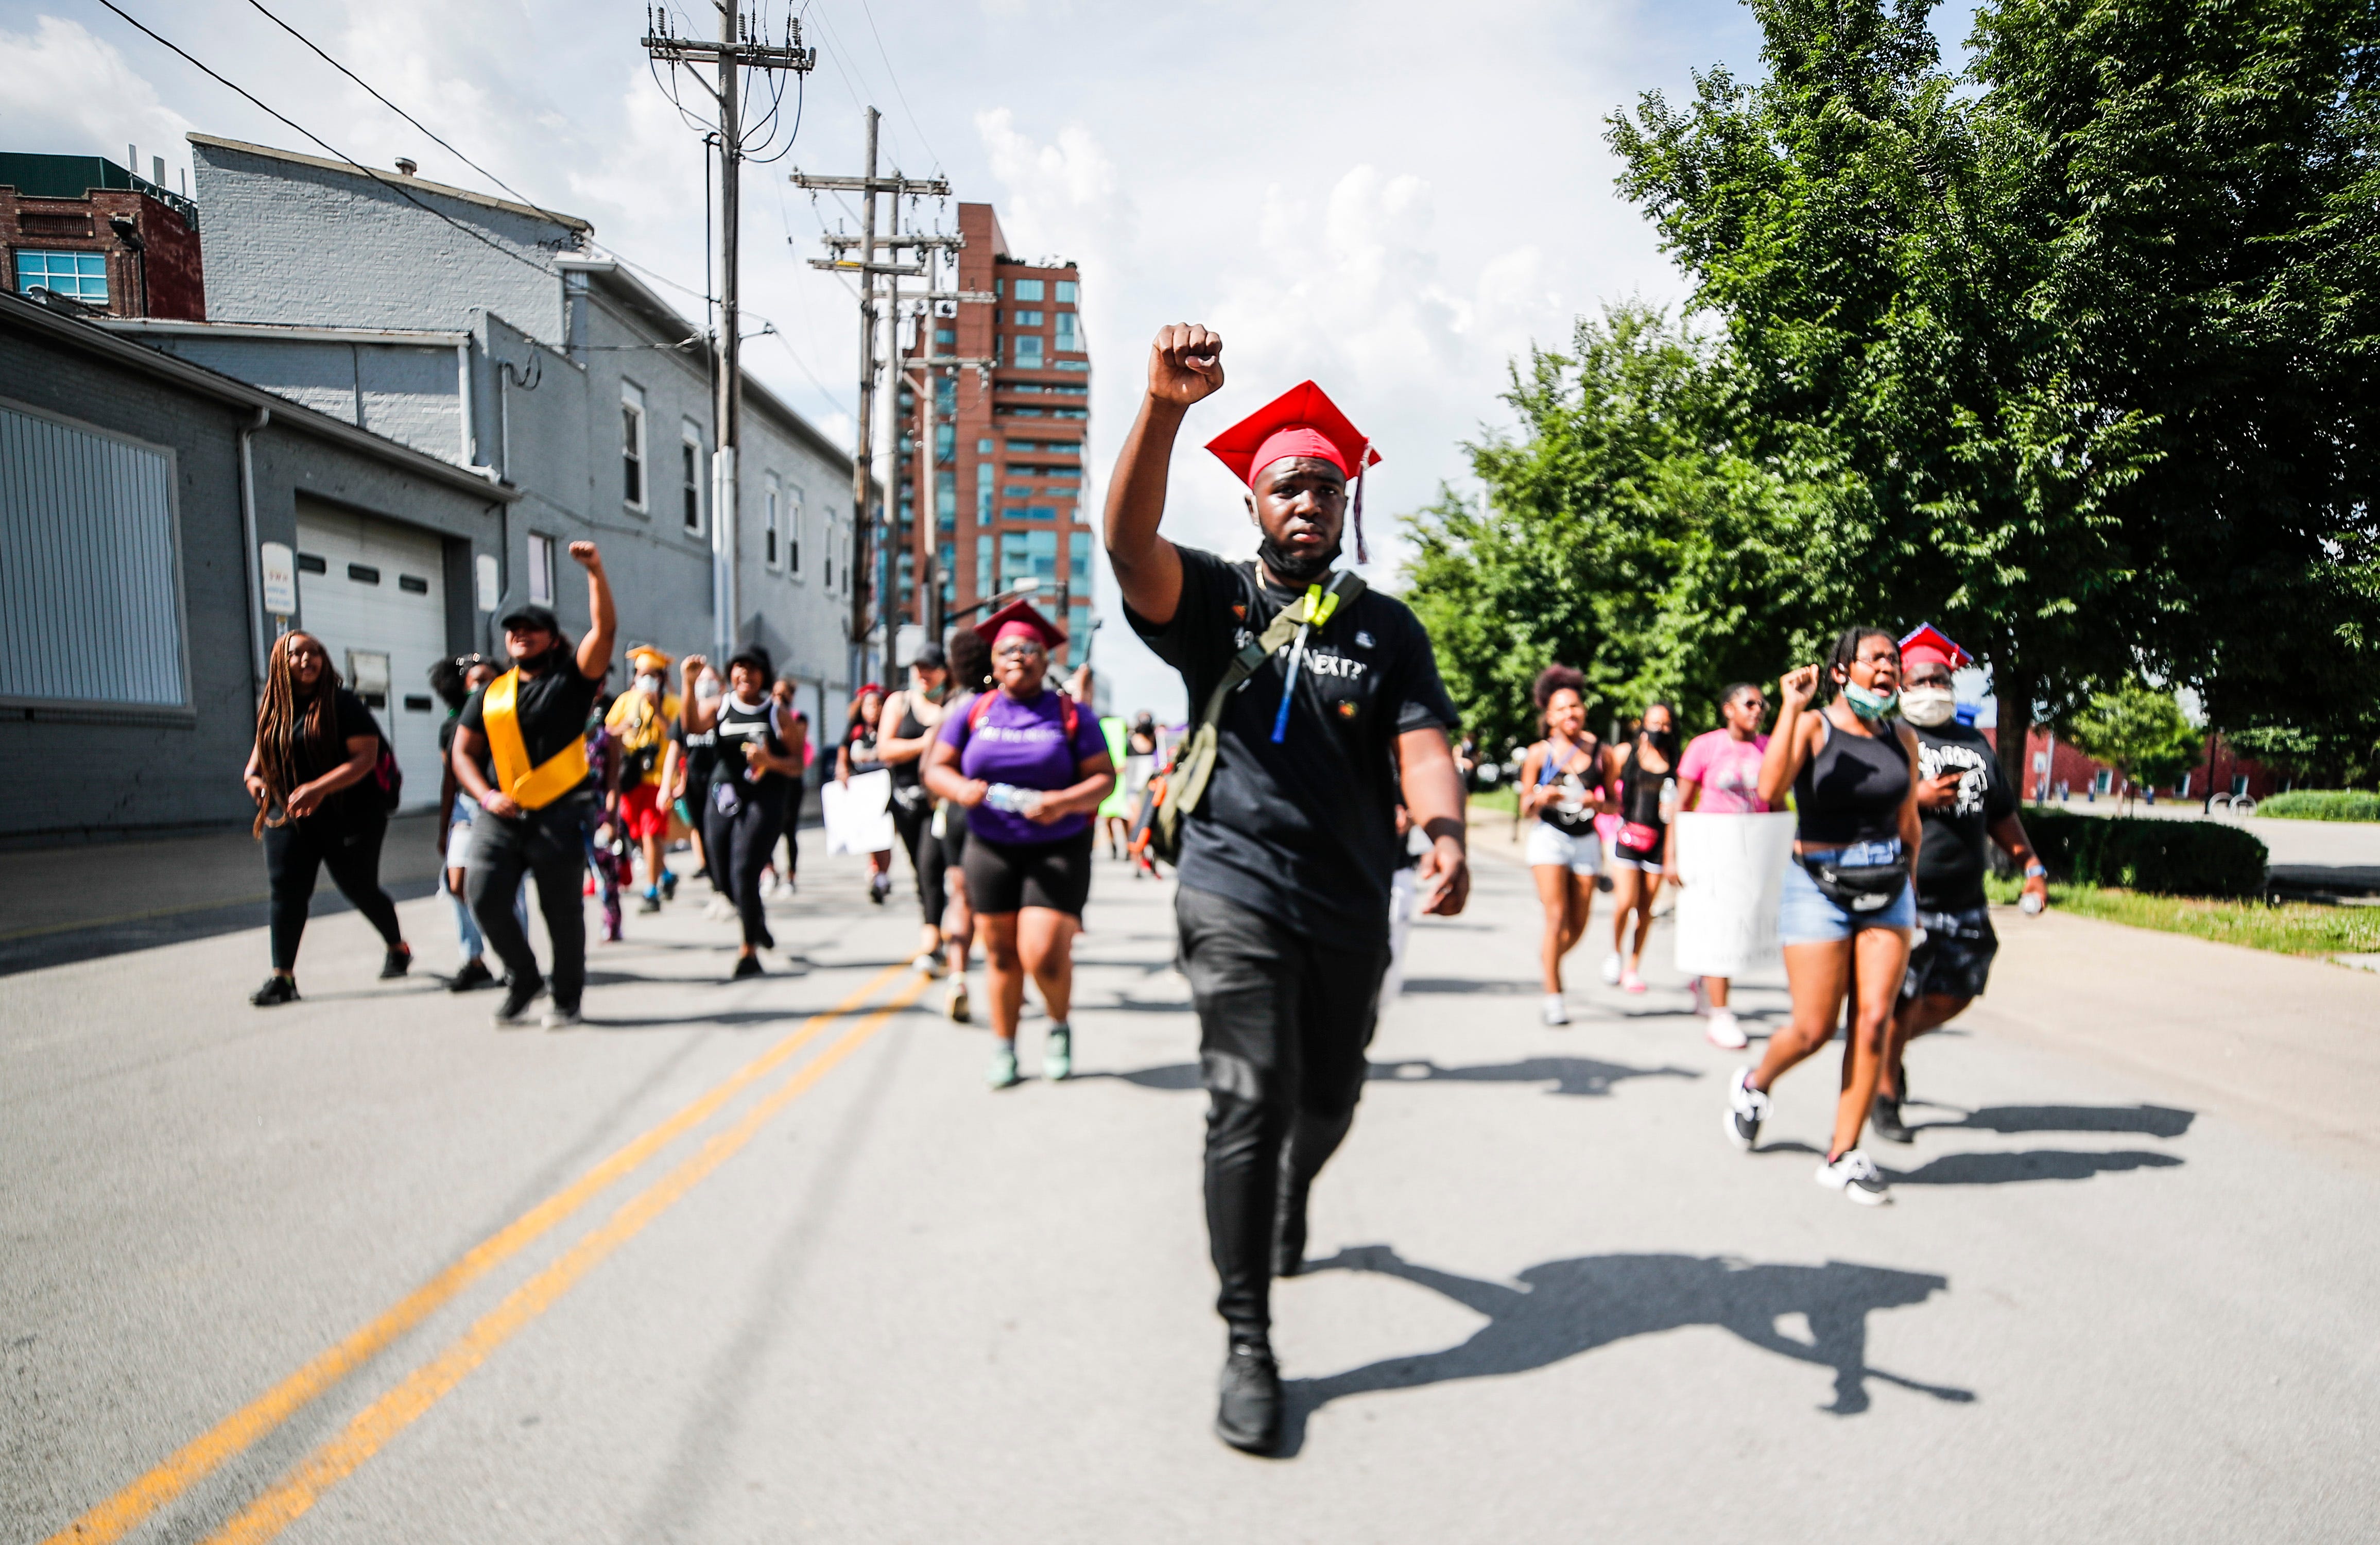 "We're marching for something bigger," said Savion Briggs, a 2020 Butler High grad. "Only way we're going to stop racism is solidarity. I shouldn't have to fear for my life just for the way I look." Briggs, among others, decided to wear their graduation caps as they marched and spoke for justice for slain EMT Breonna Taylor in Louisville.